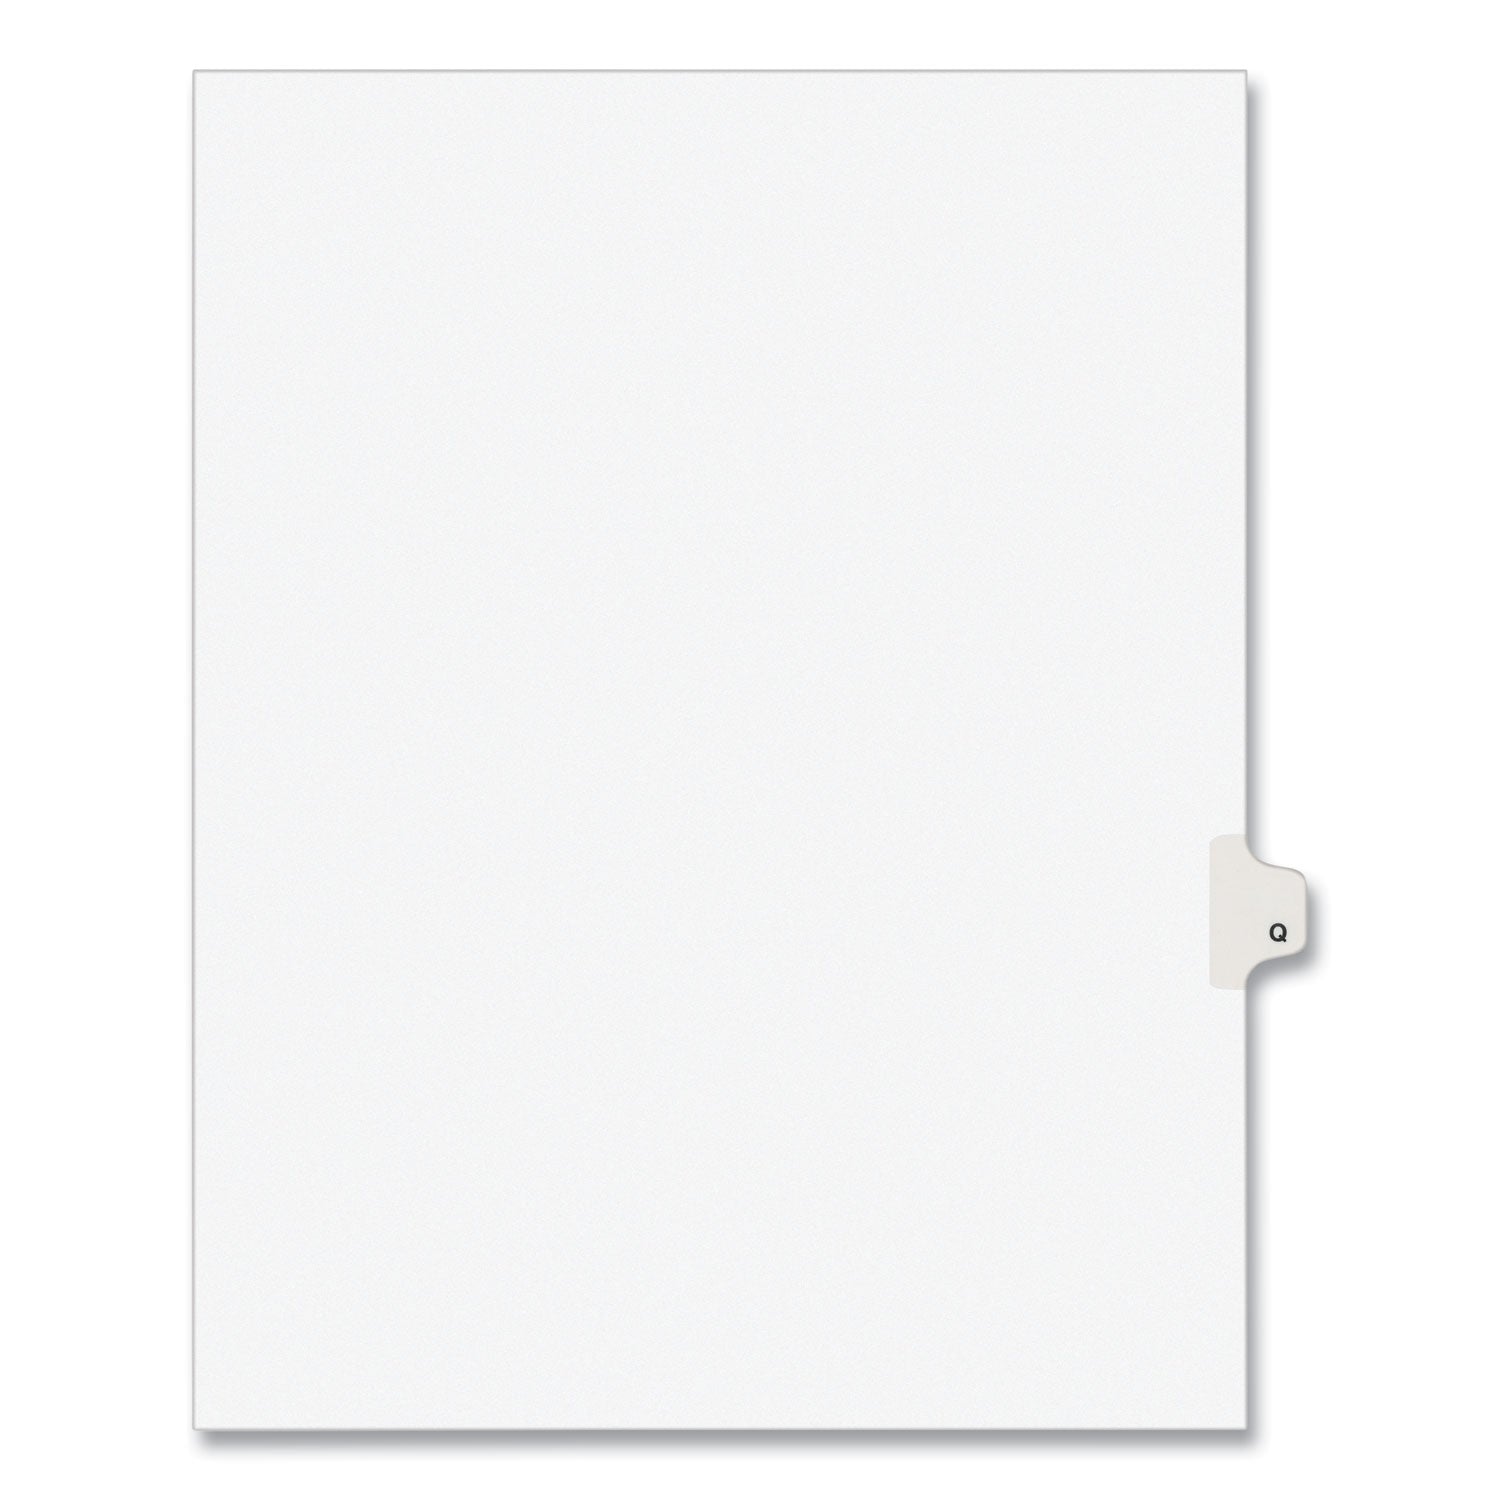 Preprinted Legal Exhibit Side Tab Index Dividers, Avery Style, 26-Tab, Q, 11 x 8.5, White, 25/Pack, (1417) - 